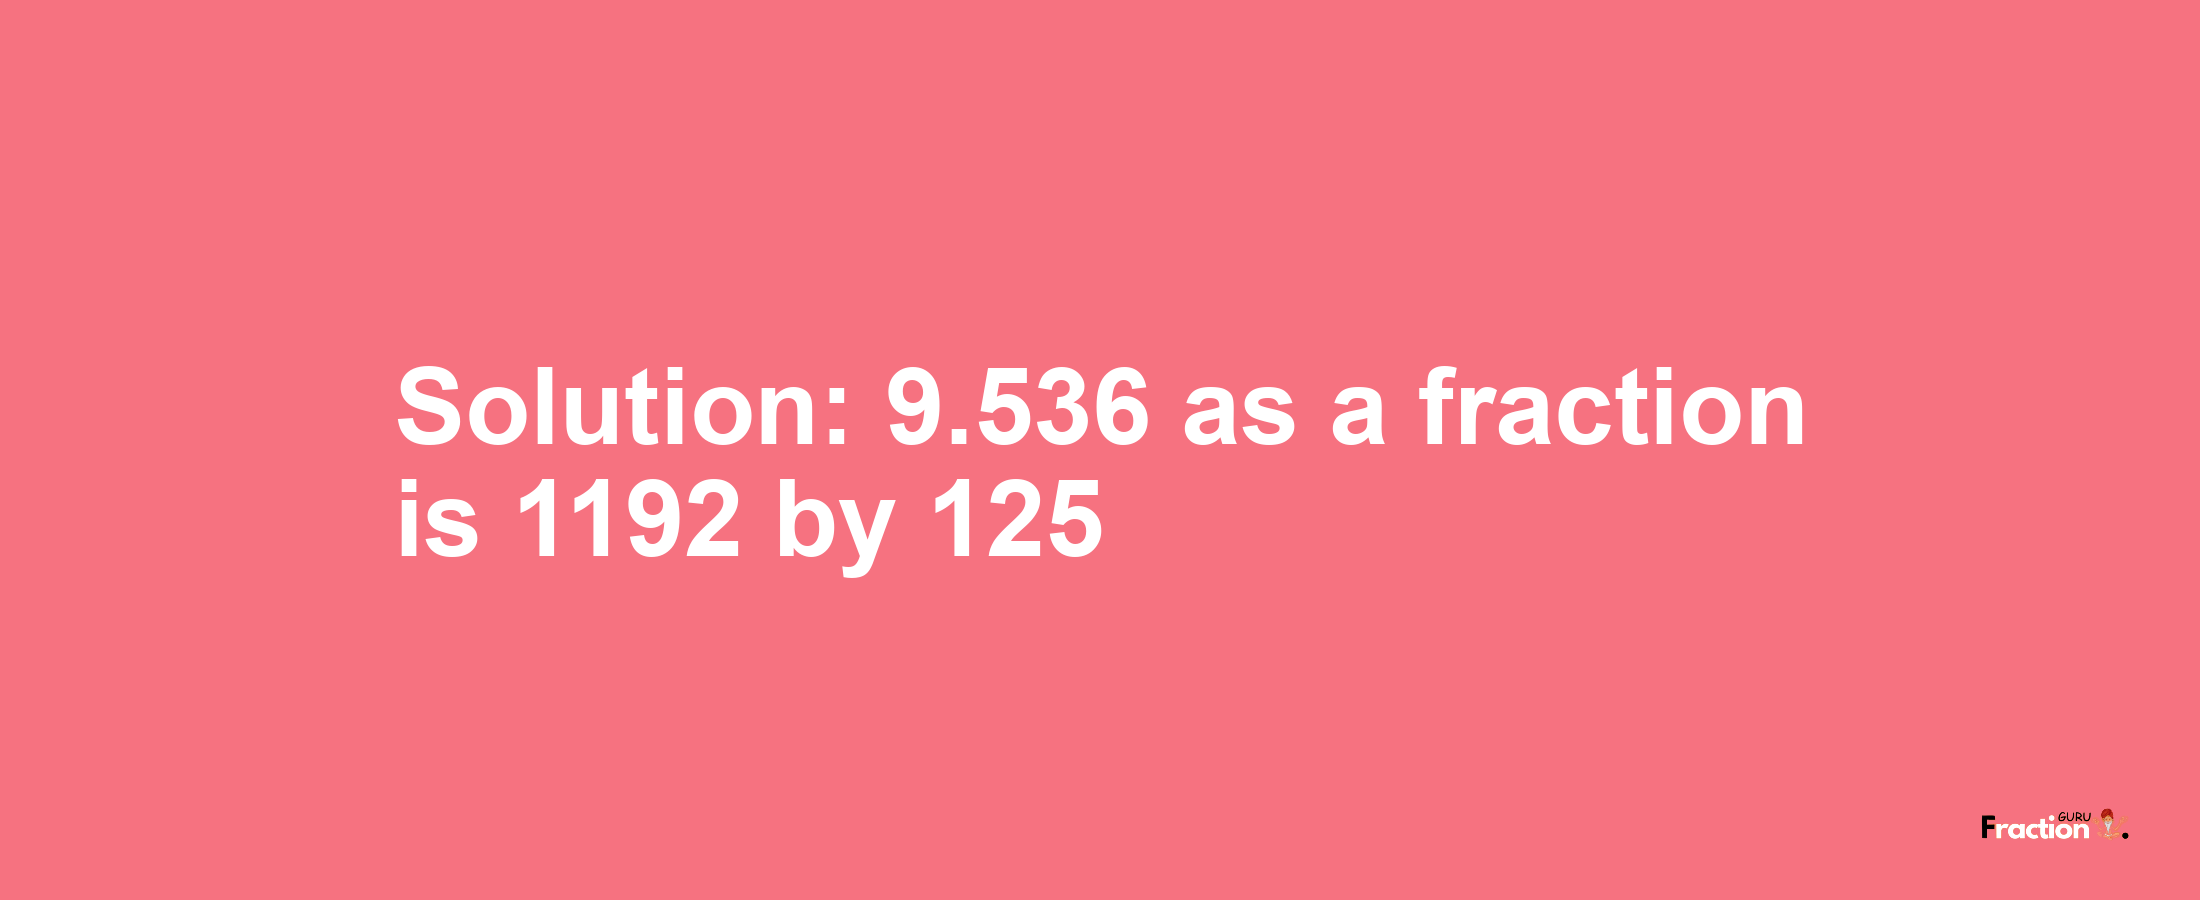 Solution:9.536 as a fraction is 1192/125